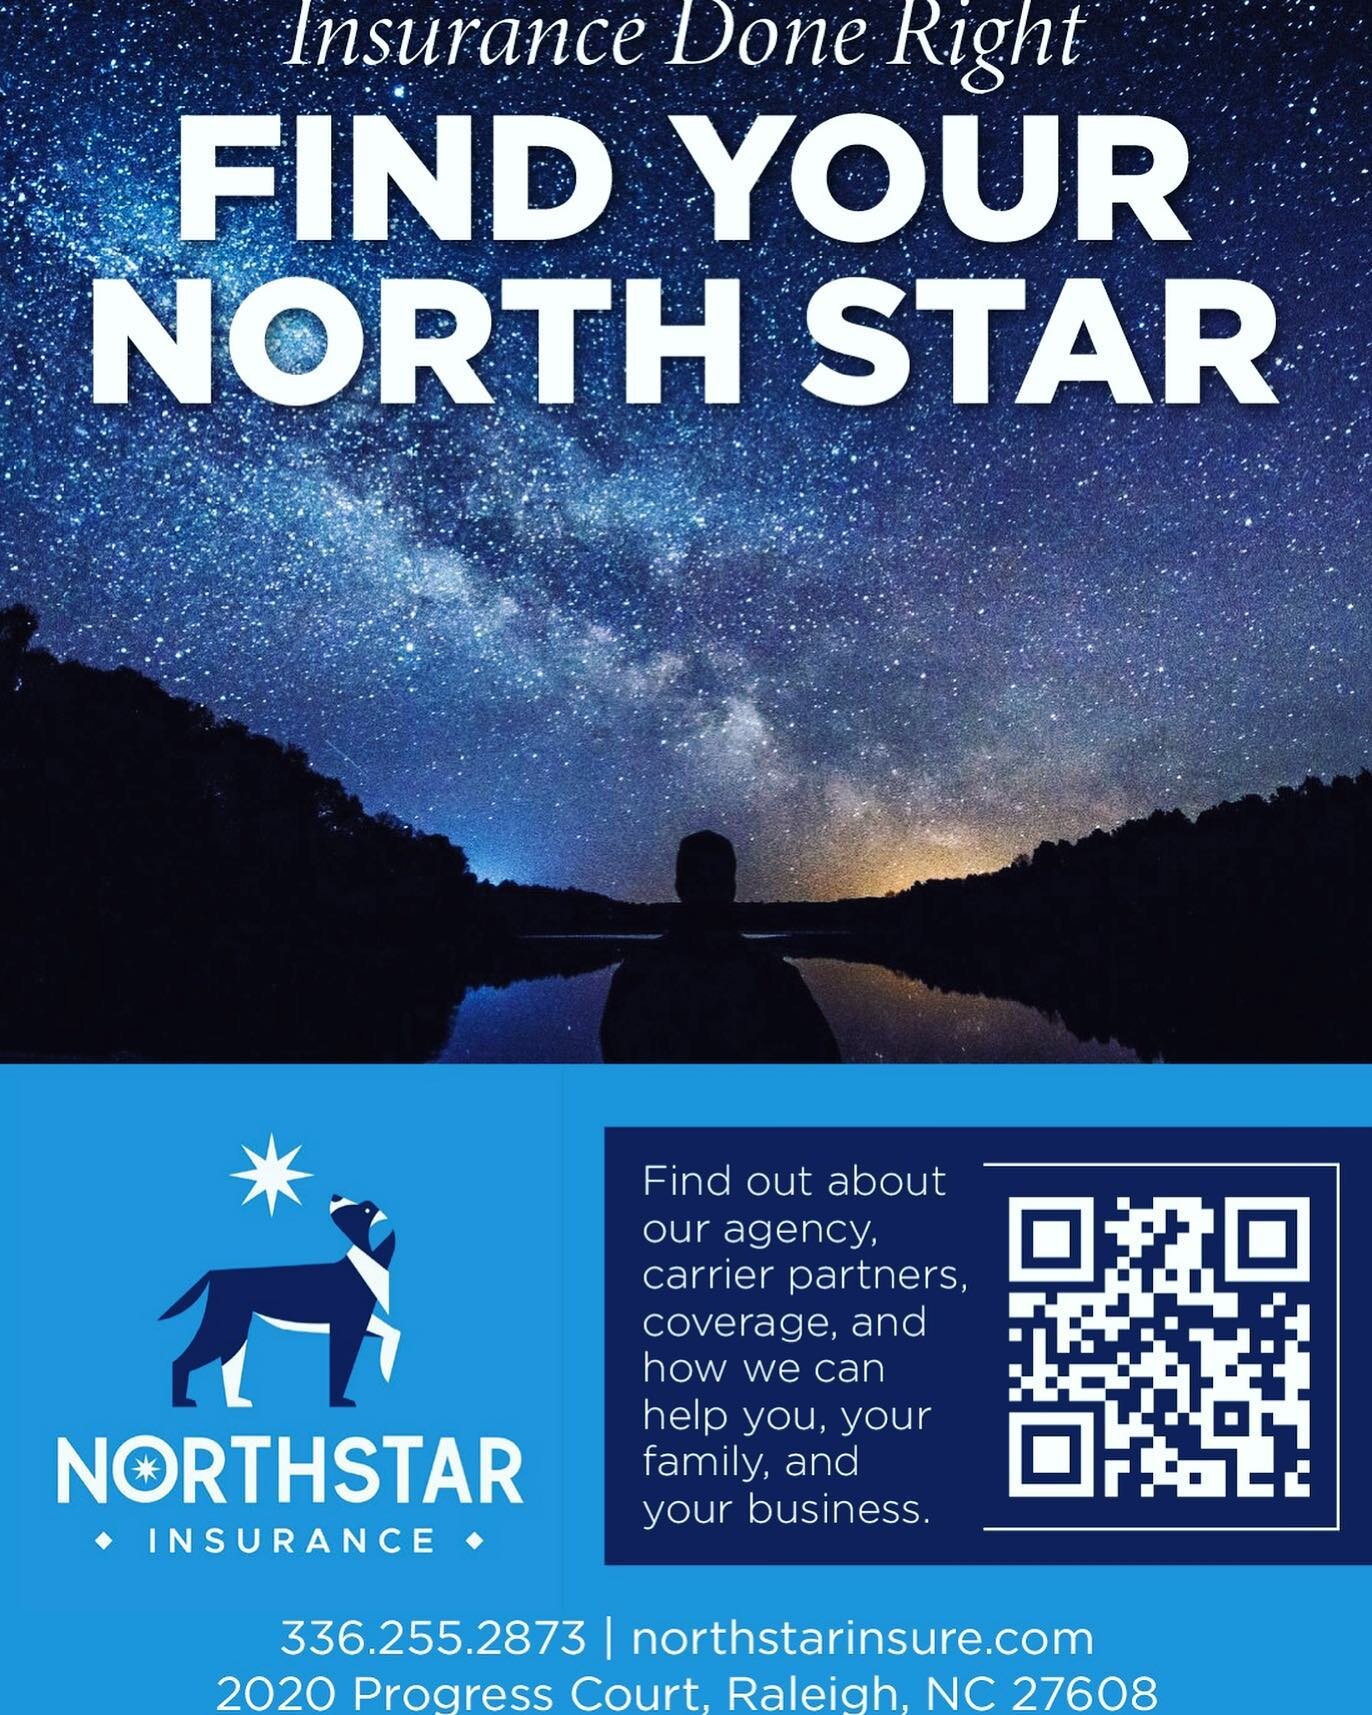 At North Star Insurance, we pride ourselves as your dedicated insurance advisor, committed to safeguarding you from the everyday risks life presents. 

Our policyholders peace of mind is our top priority. Let North Star ⭐️ help guide you through life